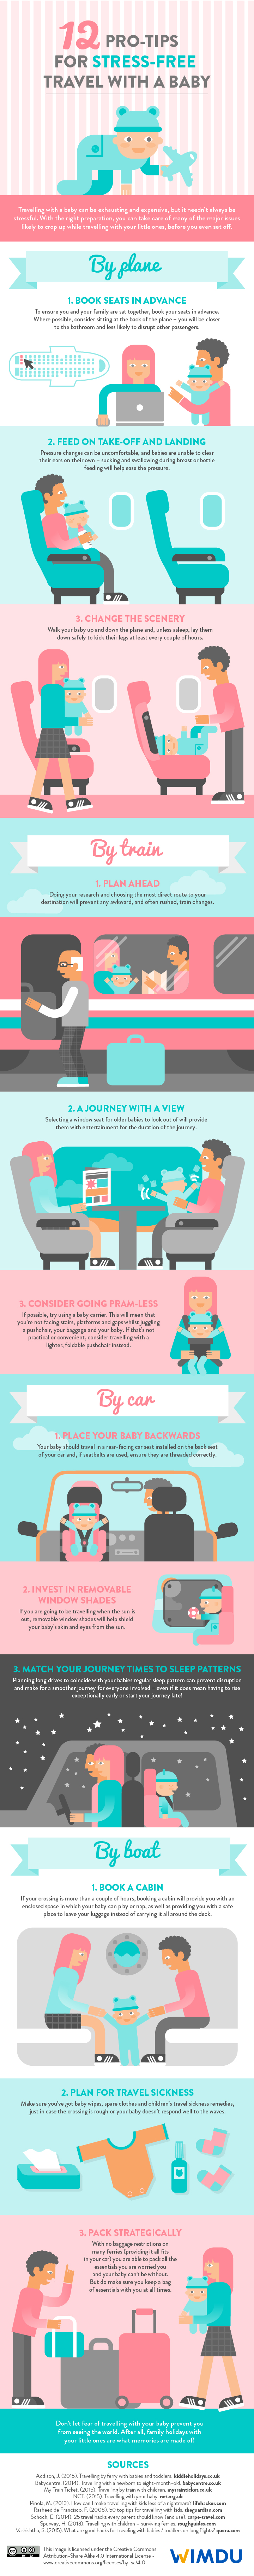 12-pro-tips-for-stress-free-travel-with-a-baby